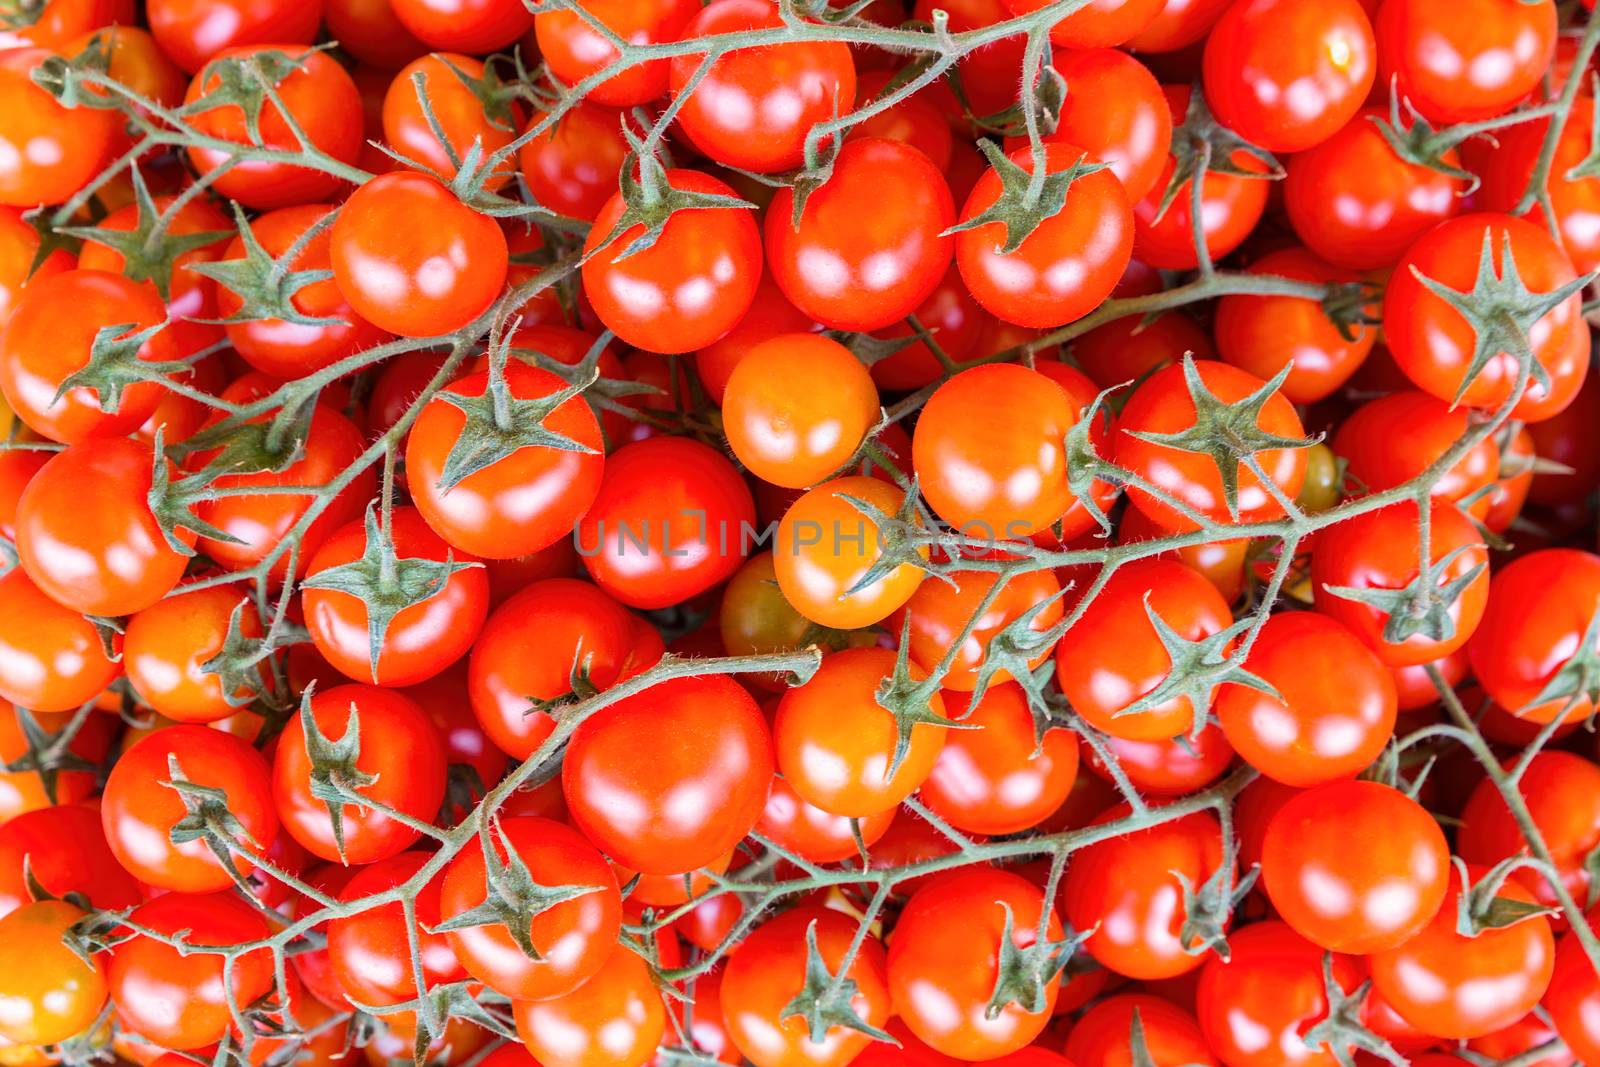 Many bunches of red vine tomatoes with stems or stalks